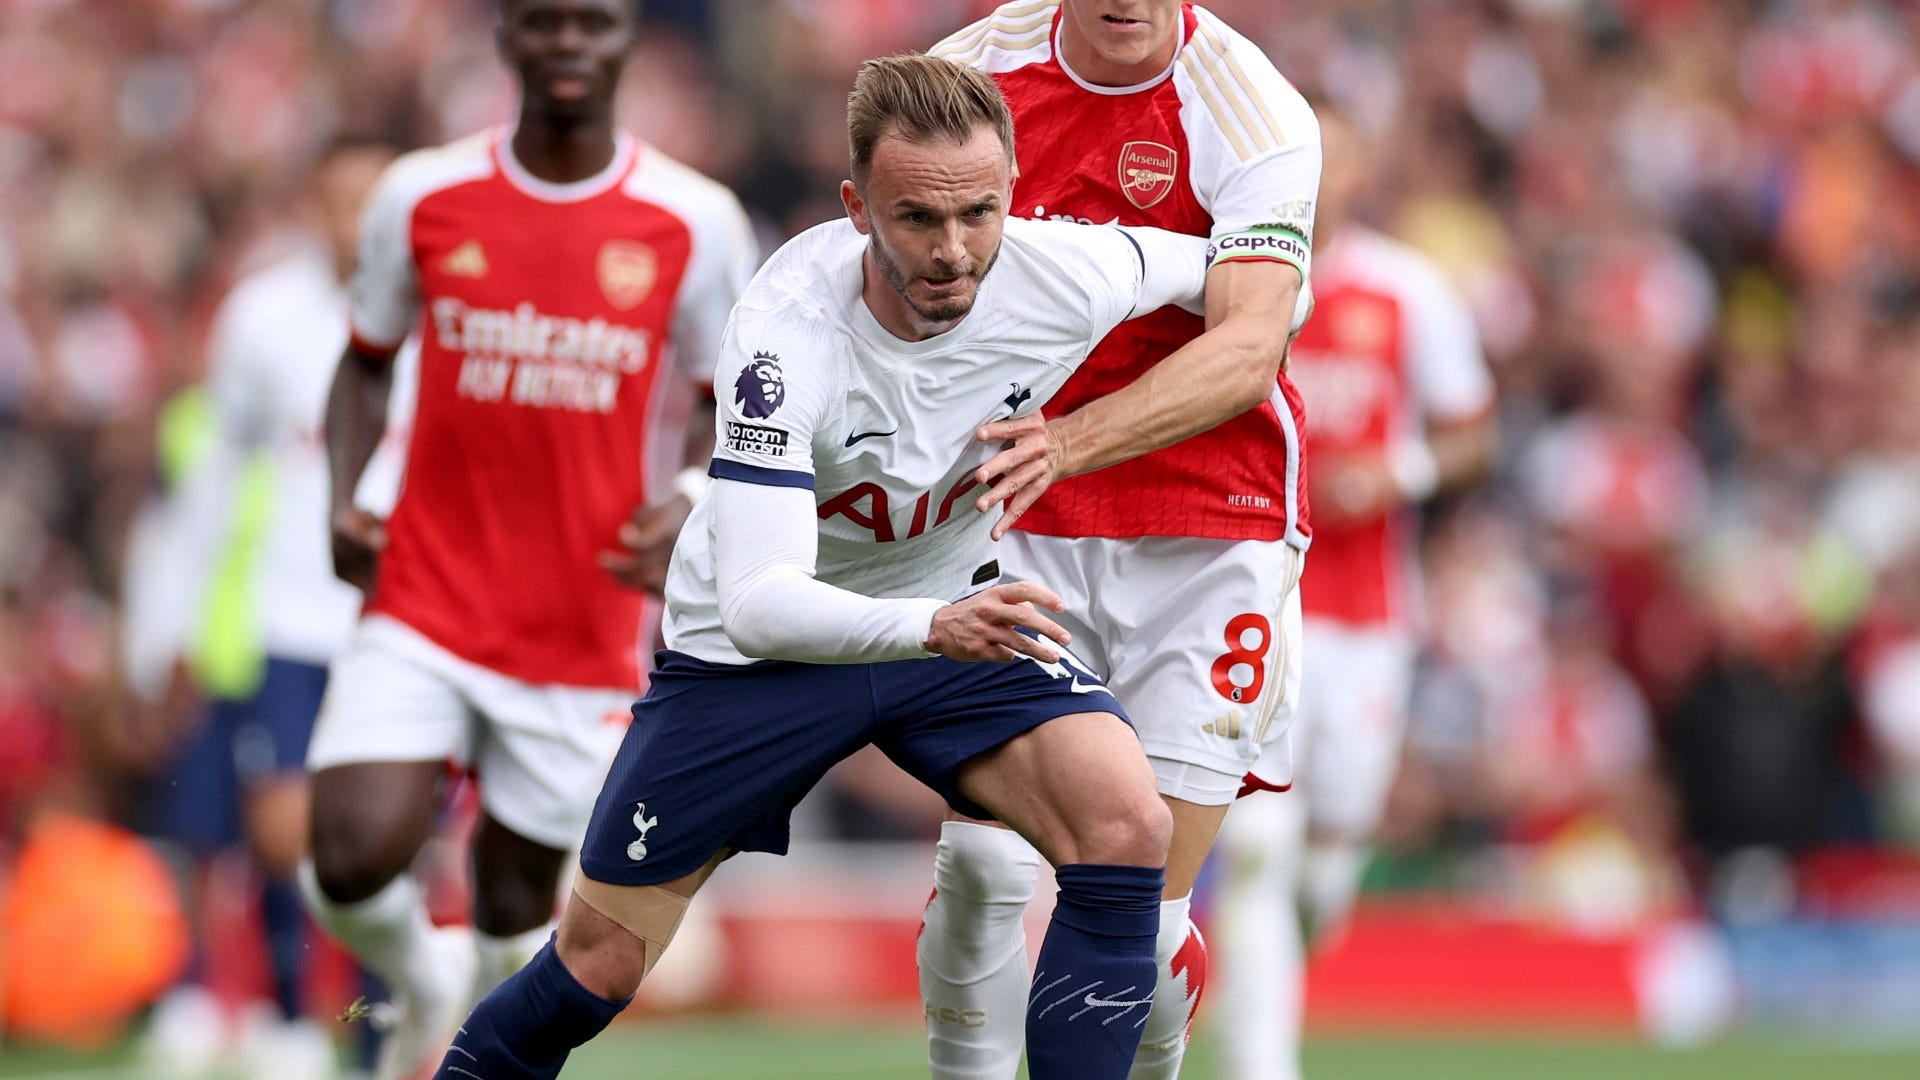 Arsenal 2-2 Tottenham LIVE RESULT: Declan Rice injury latest, Son secures  point for Spurs with quickfire equaliser